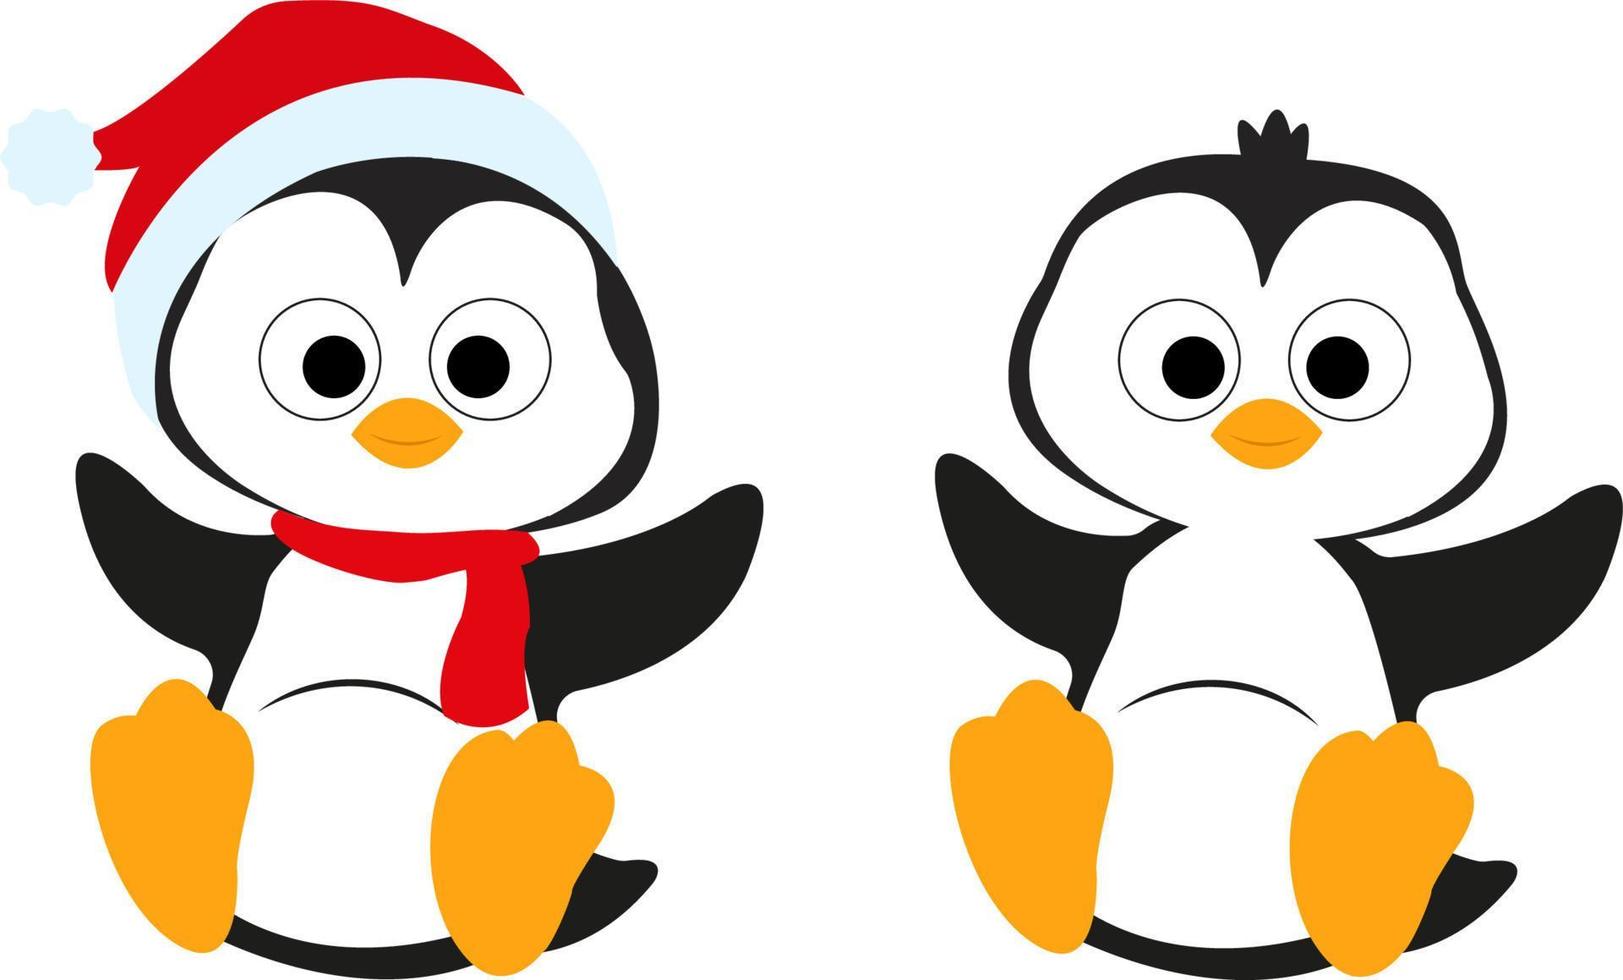 Christmas card with penguins holding string of lights. Season's greetings vector